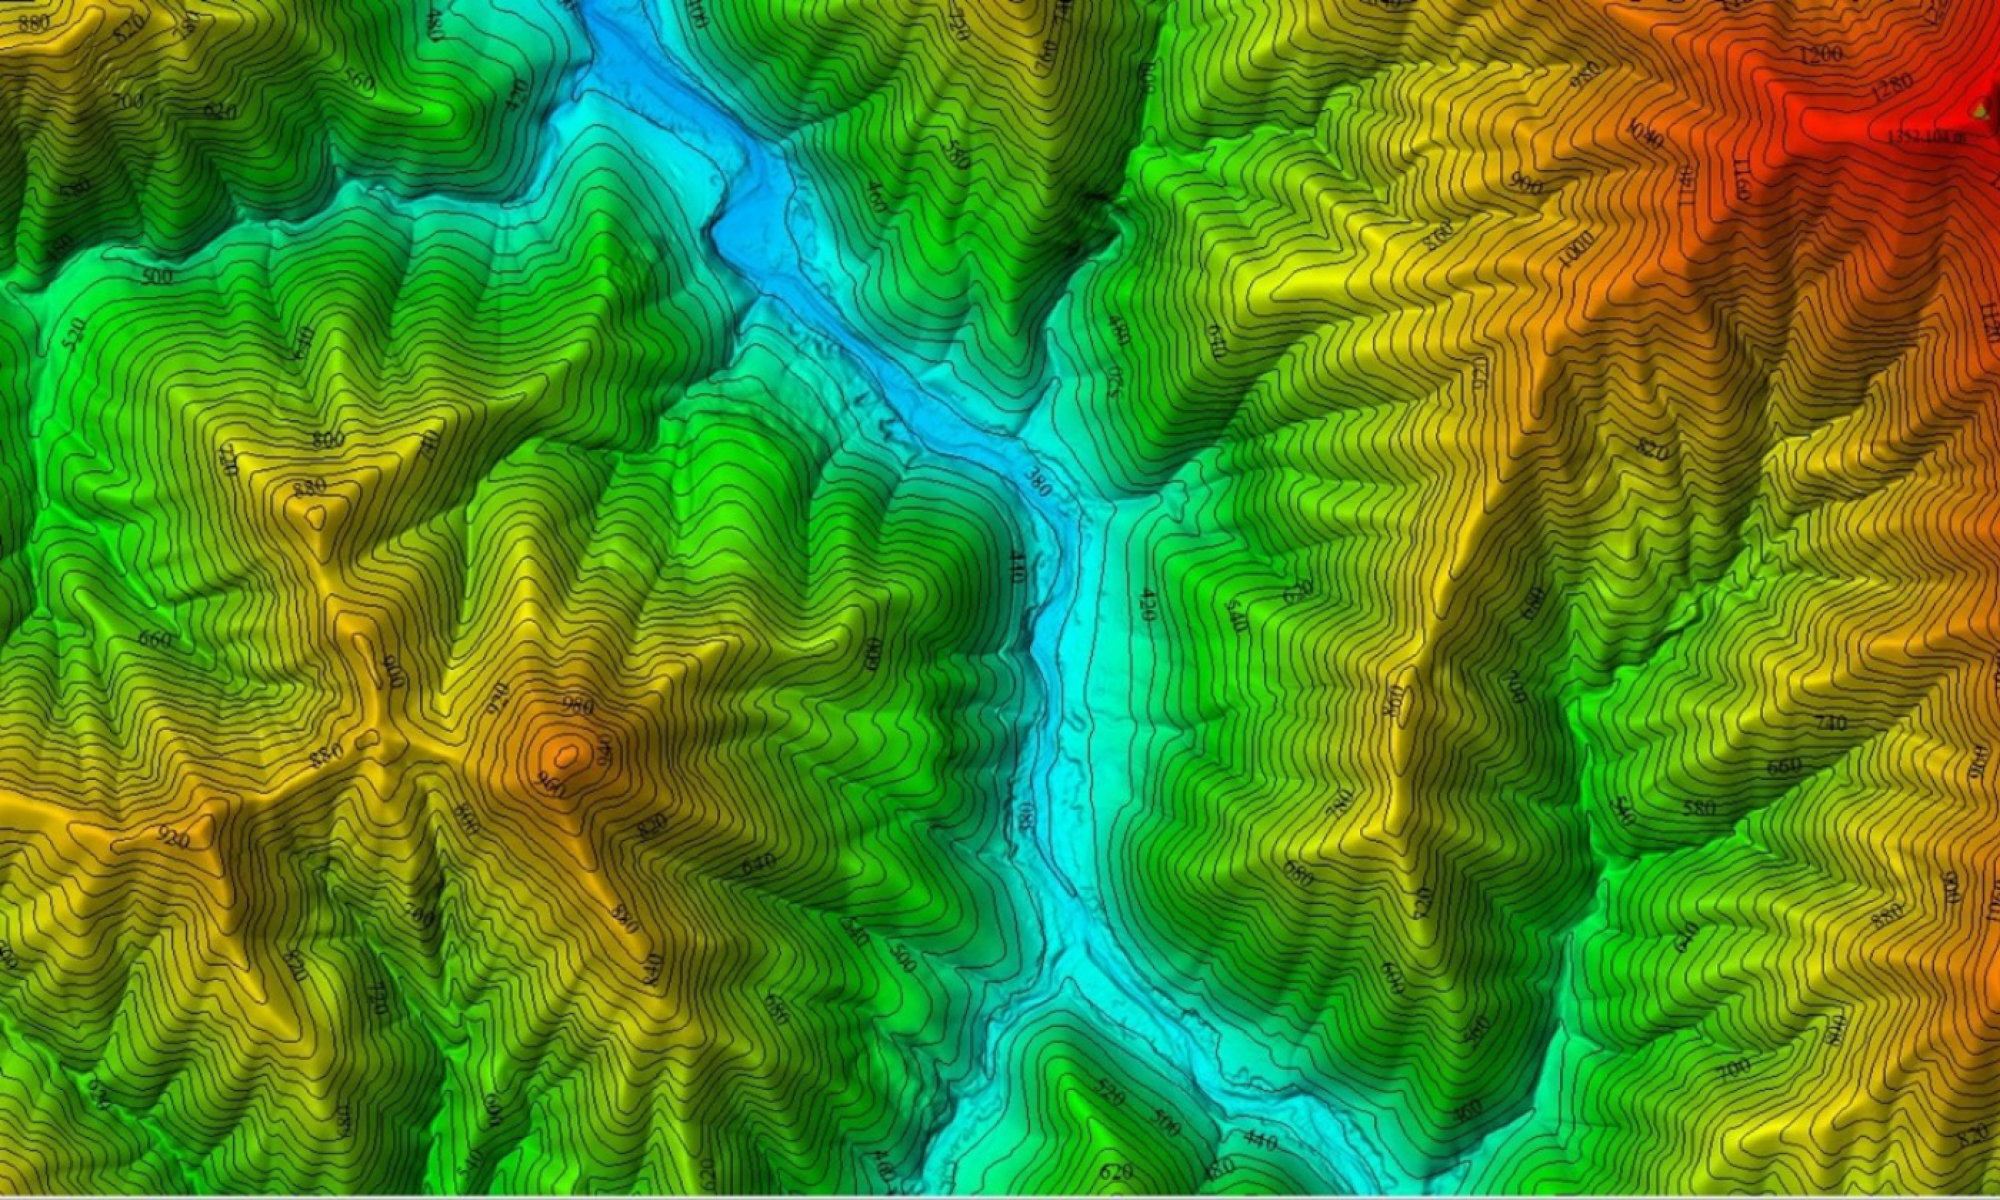 Vicmap Elevation 10m–20 m Contours displayed over Buckland River Valley